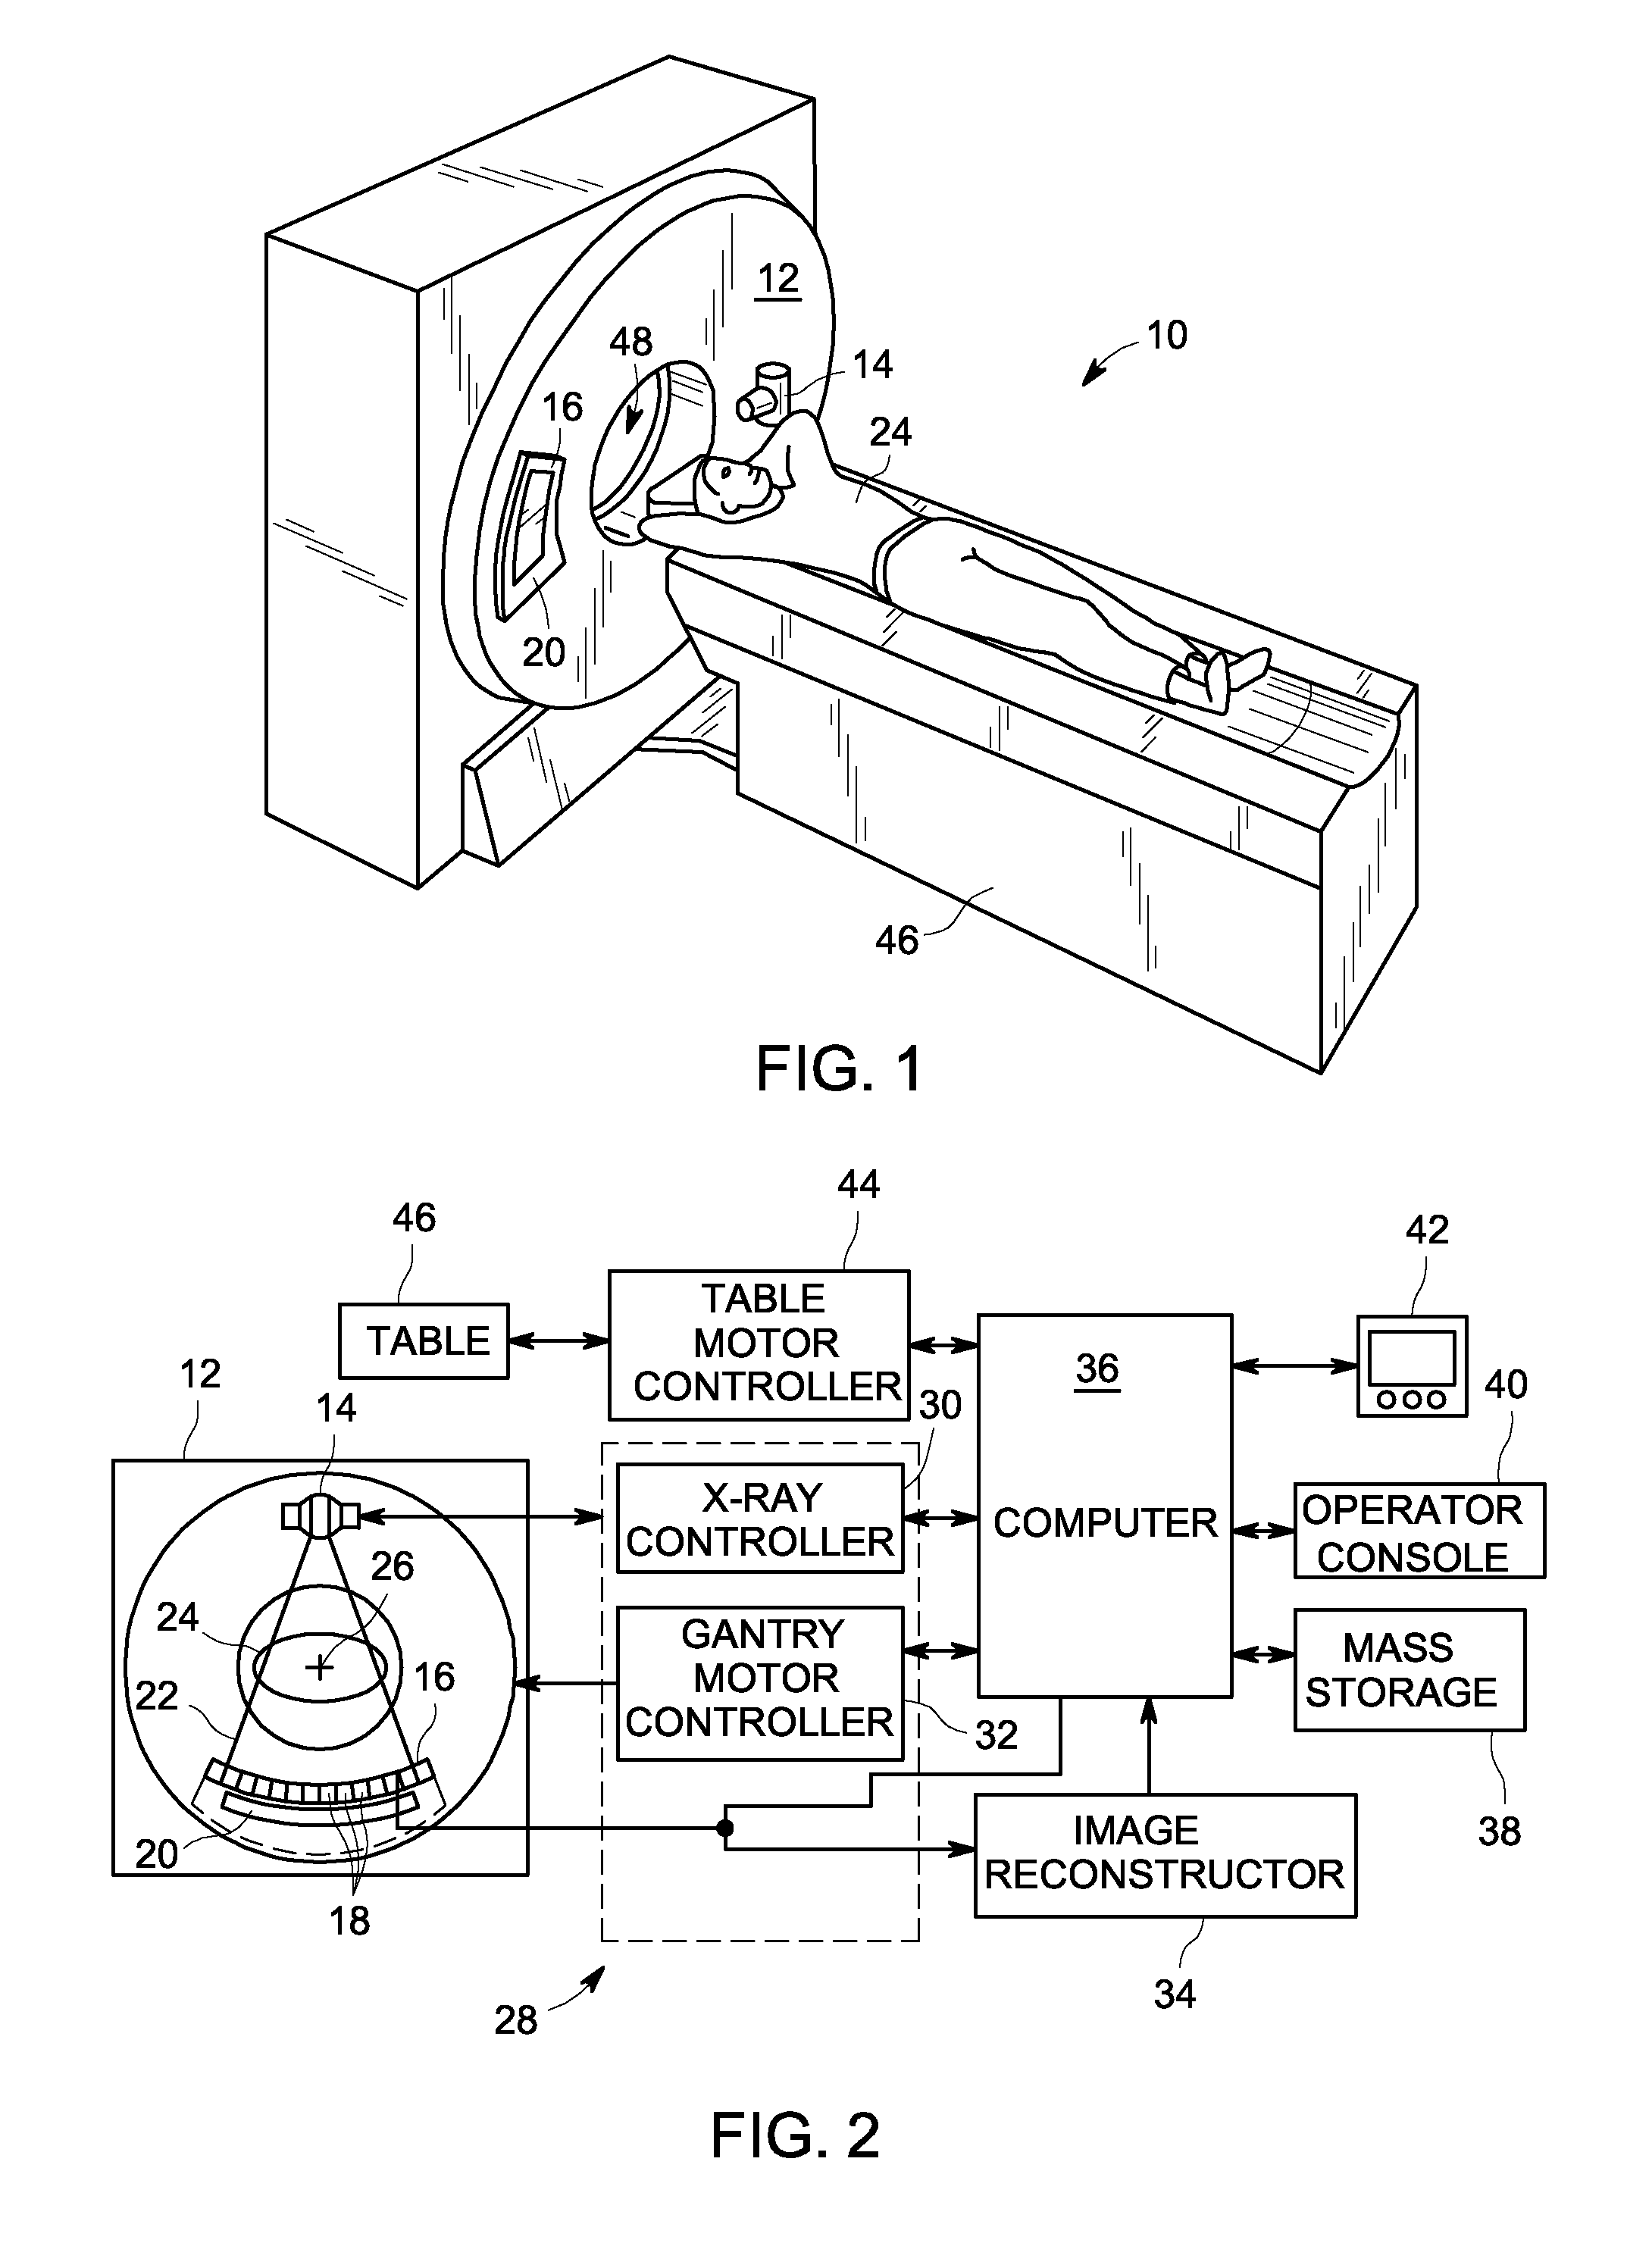 Apparatus and method for improved transient response in an electromagnetically controlled X-ray tube